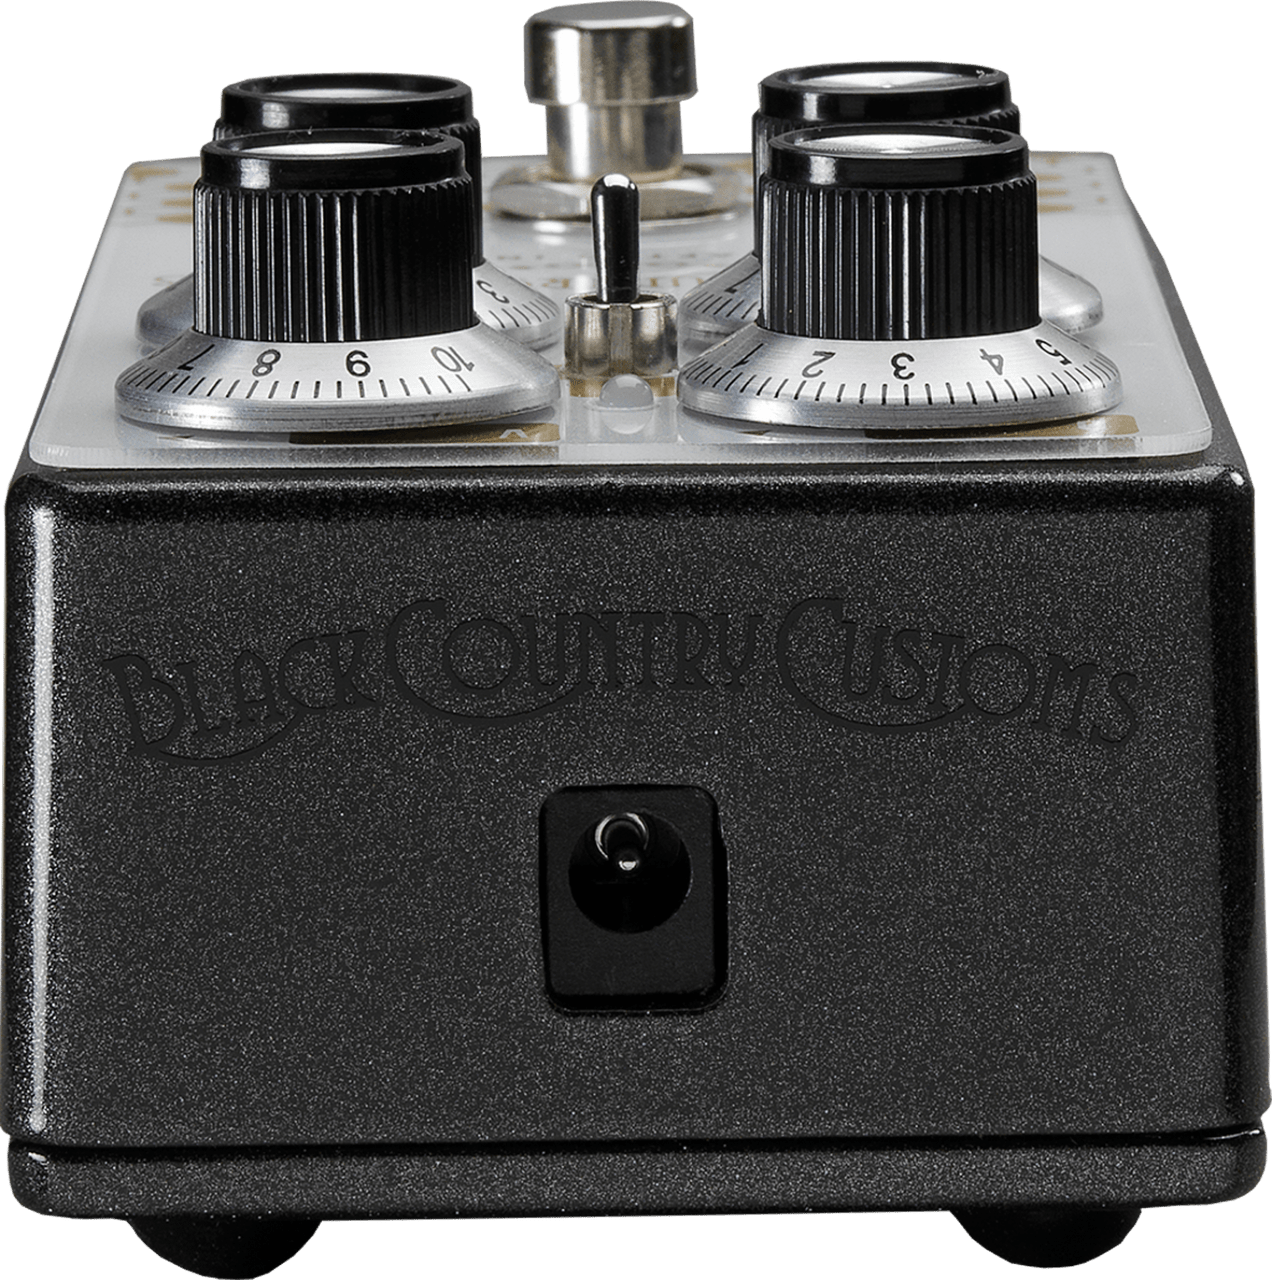 Black Country Customs SteelPark Boost Pedal